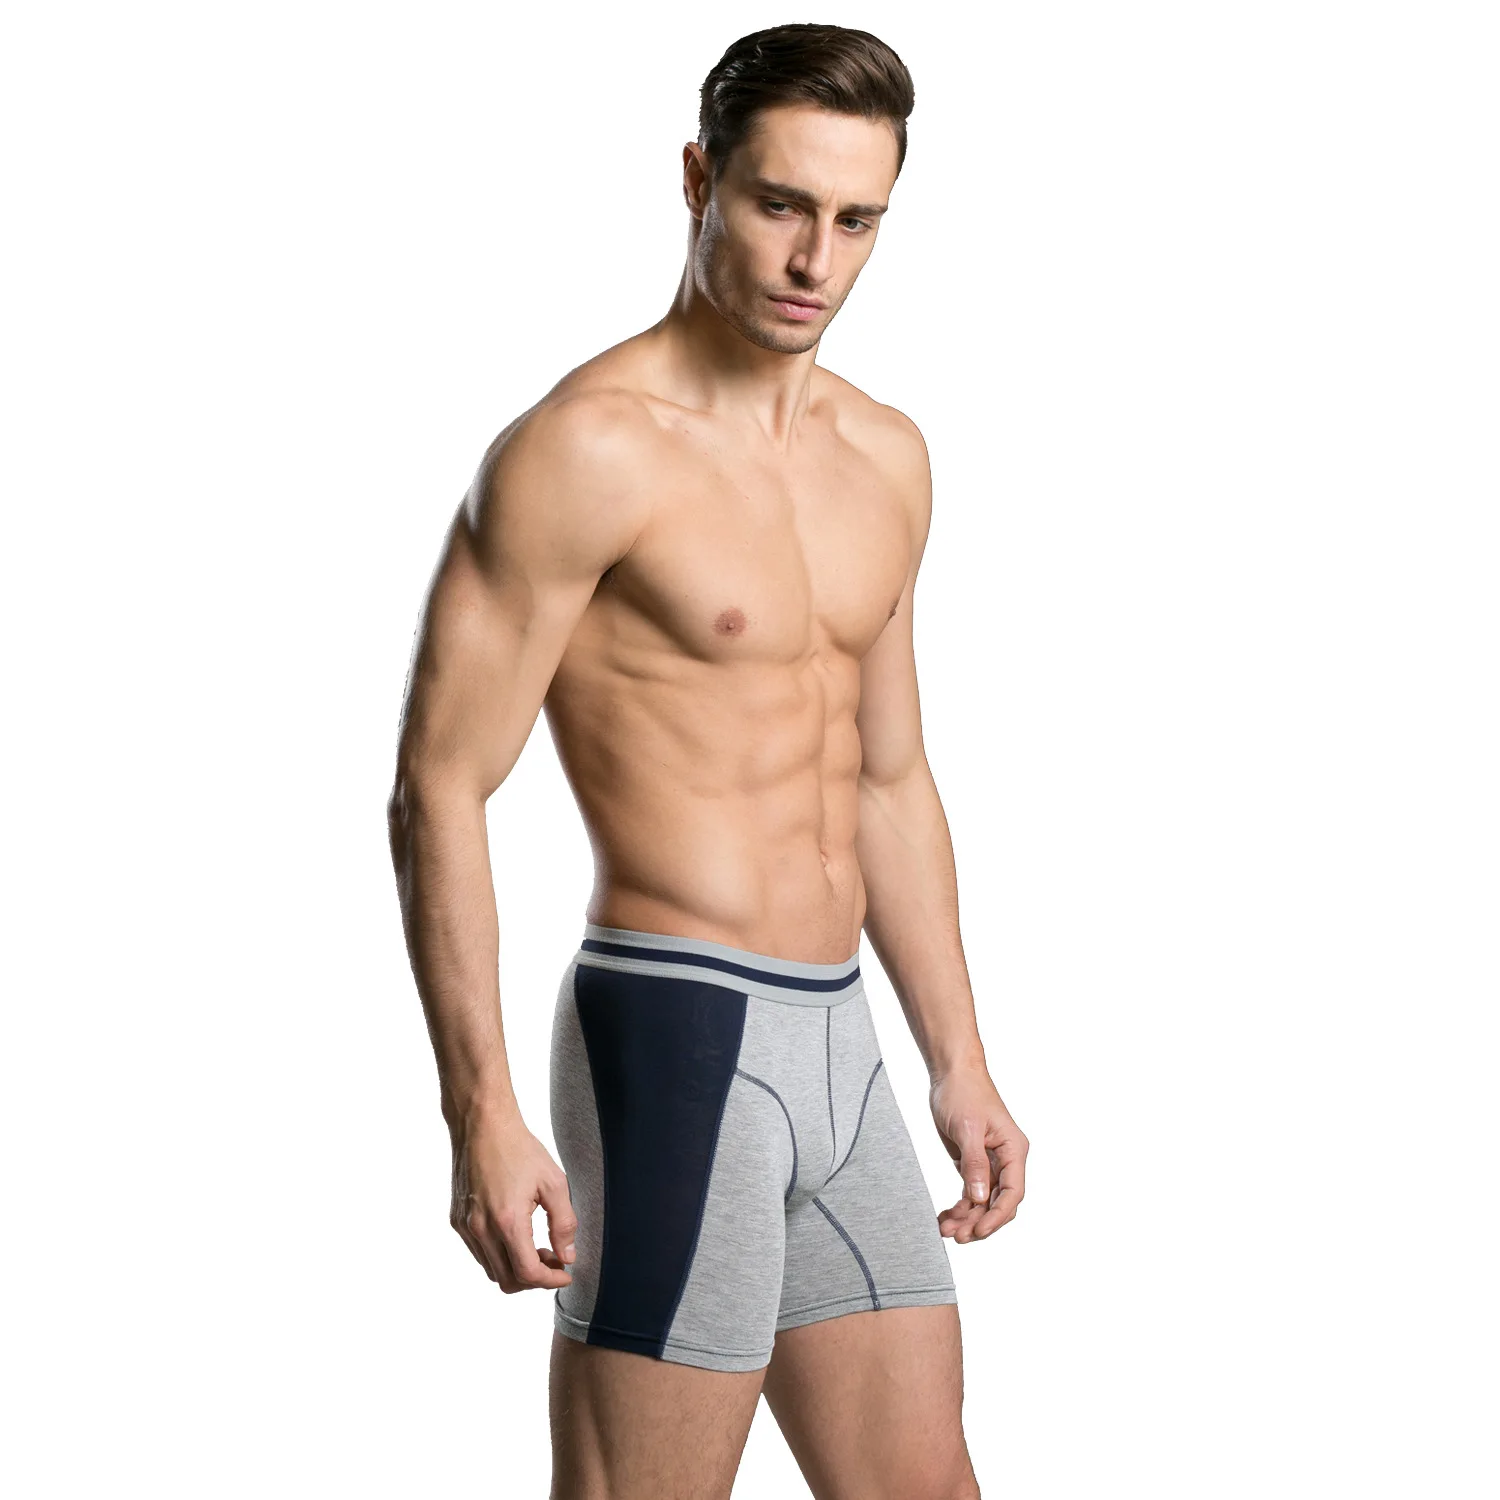 Man's Modal Boxershorts for Sport Quick-drying Men Boxers Underwear Breathable Comfortable Underpants Male lingerie shorts